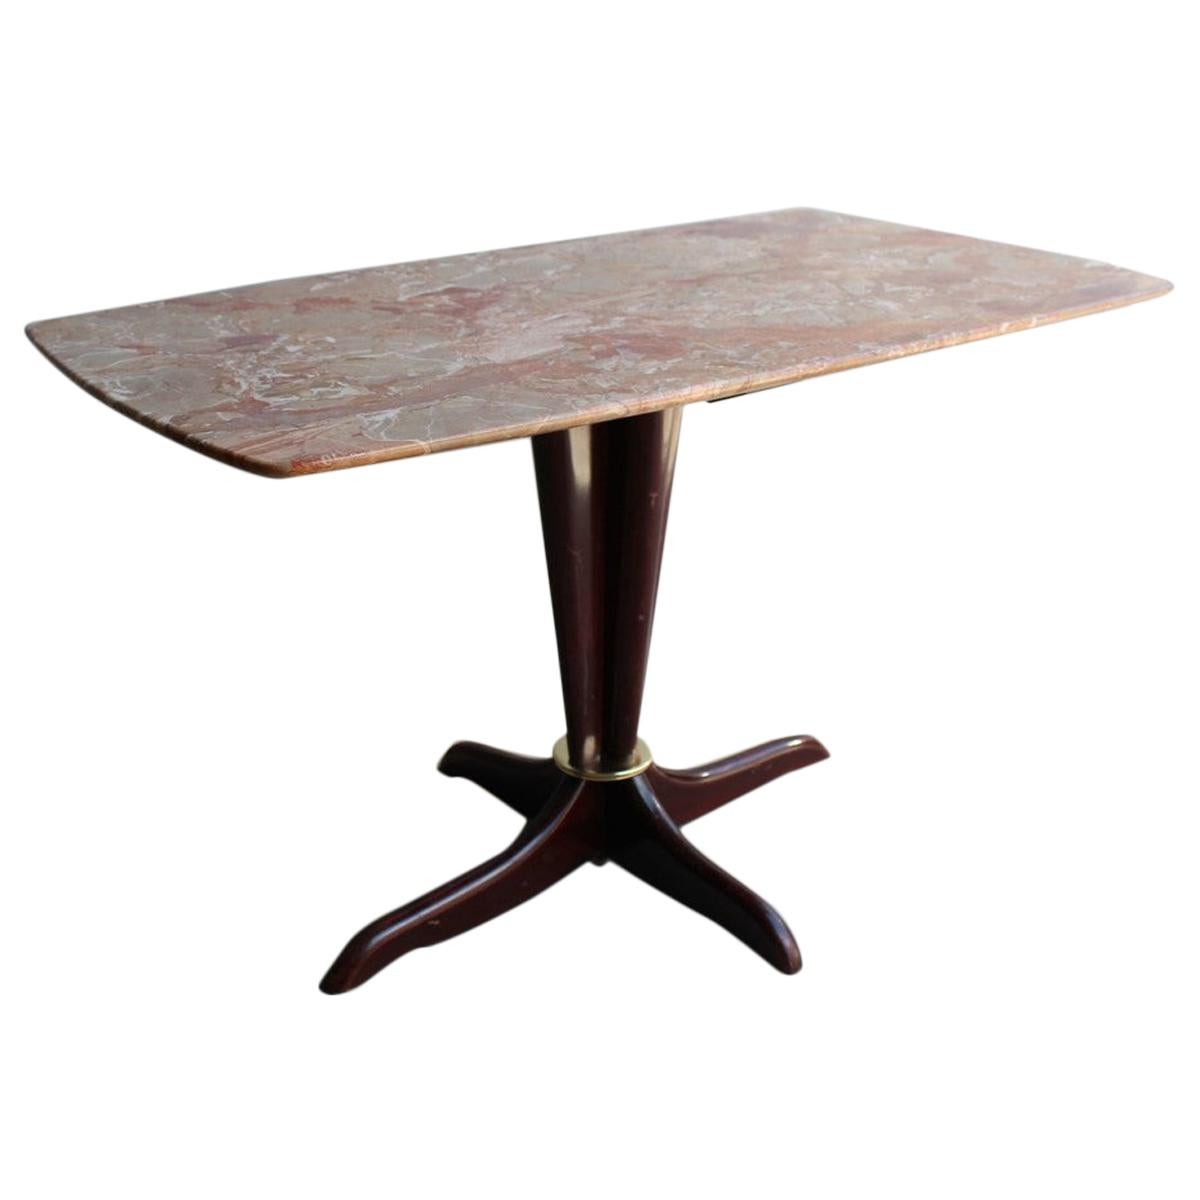 Midcentury Italian Design Table Coffee Mahogany Brass Marble Gold Brown Beige For Sale